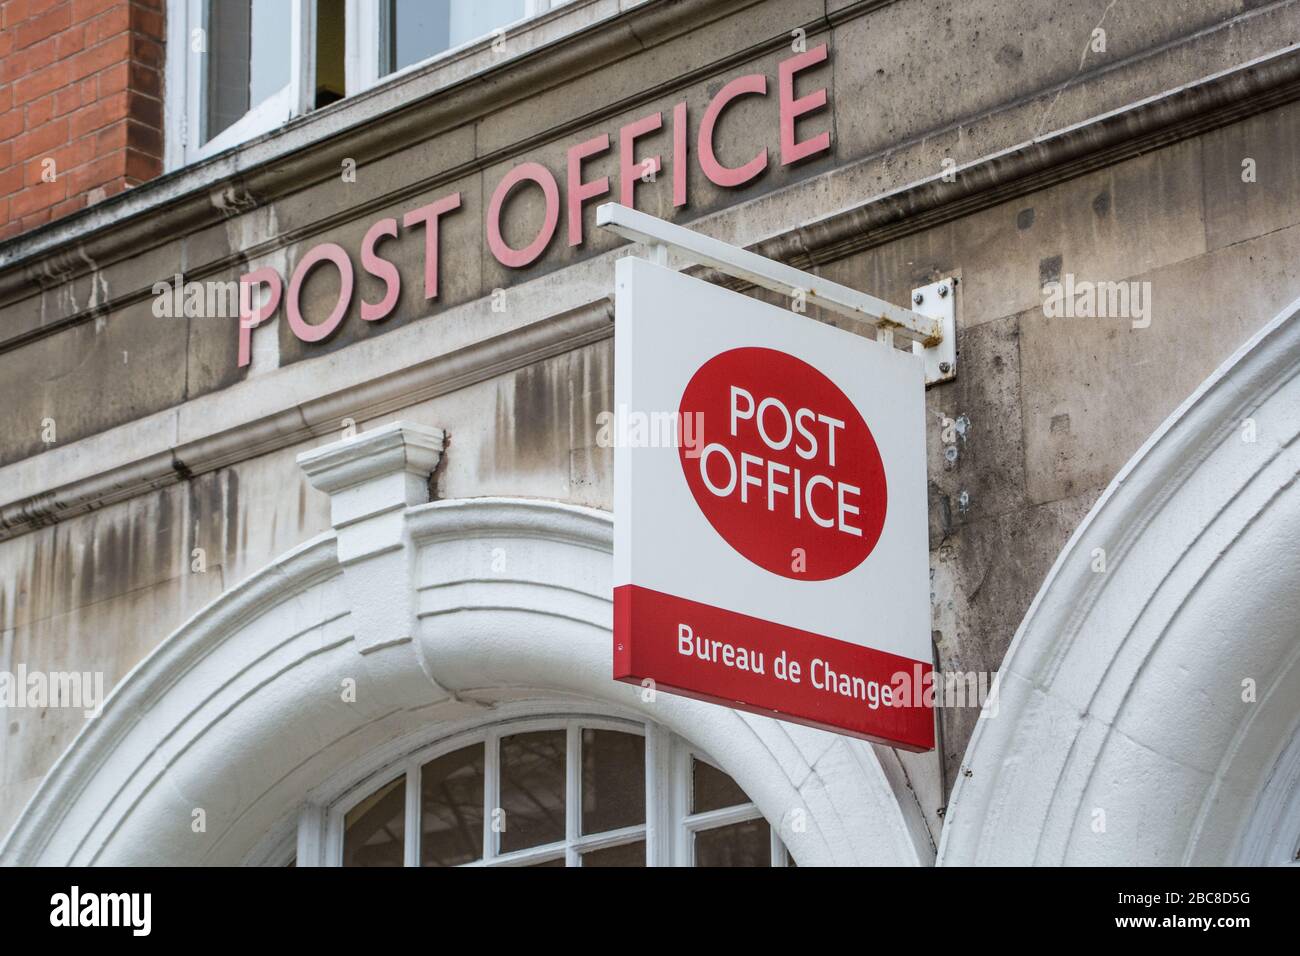 Post Office, a British high street post office company- exterior logo / signage- London Stock Photo